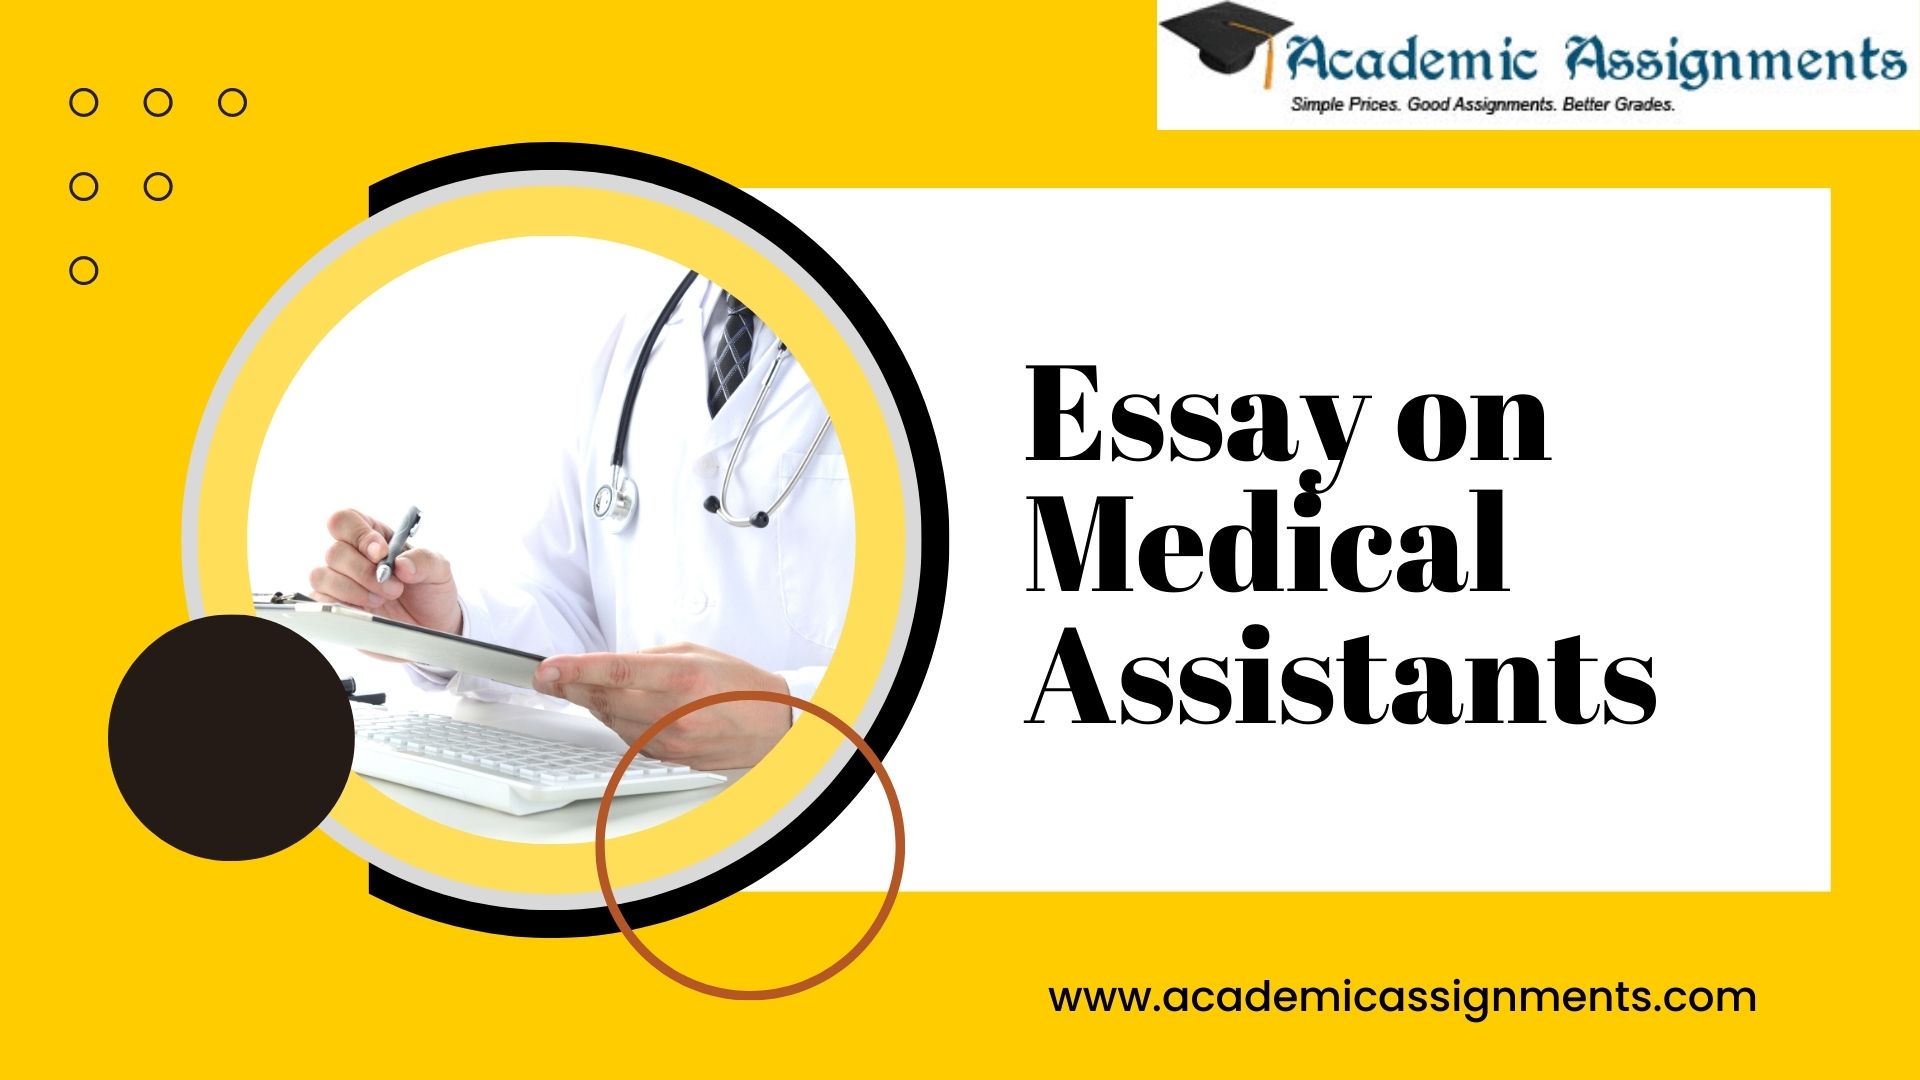 Essay on Medical Assistants